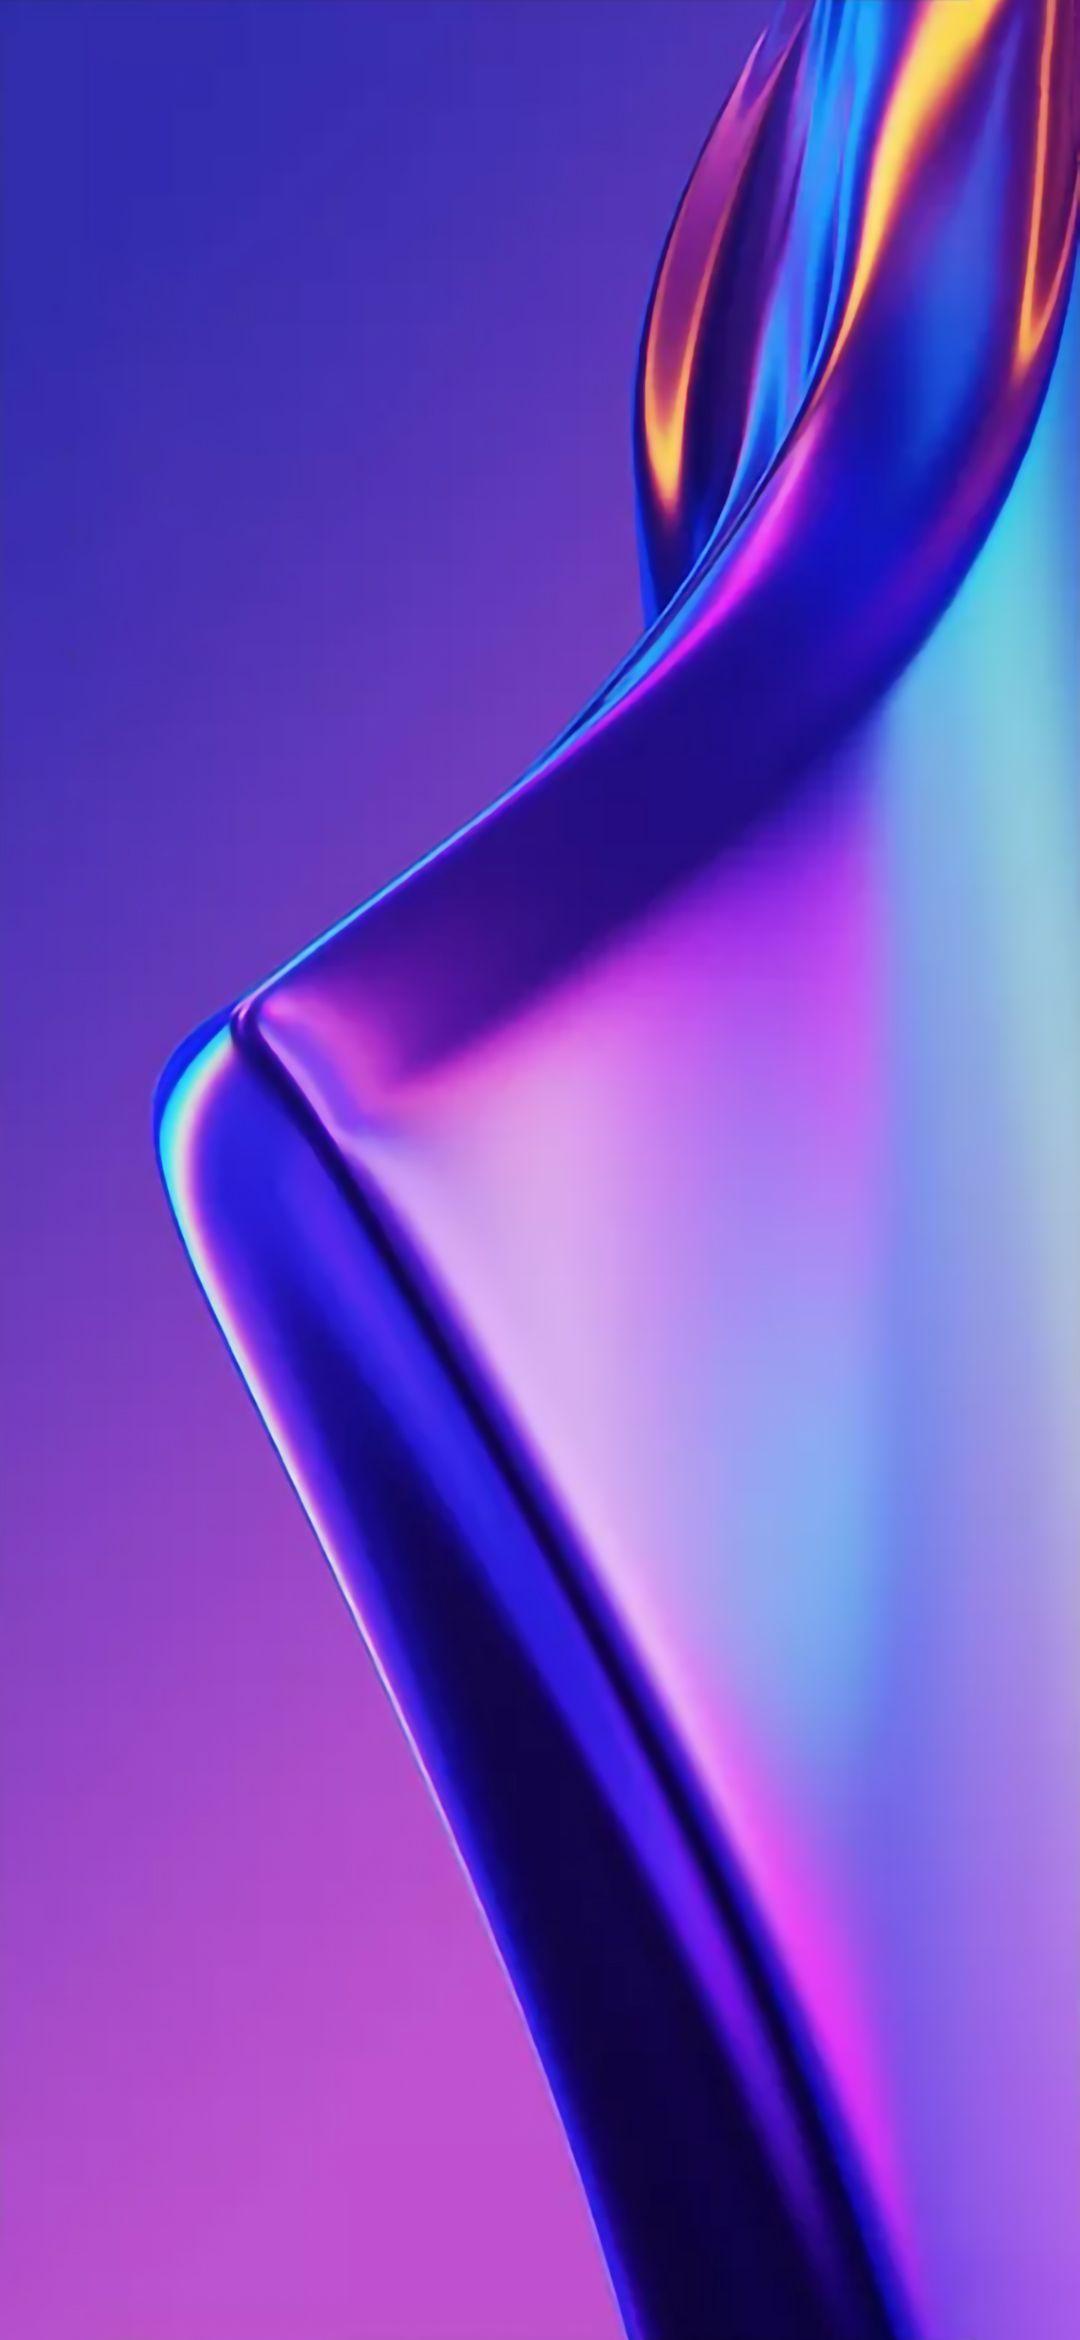 Download Oppo K3 Official Wallpaper Here! Full HD Resolution 1080